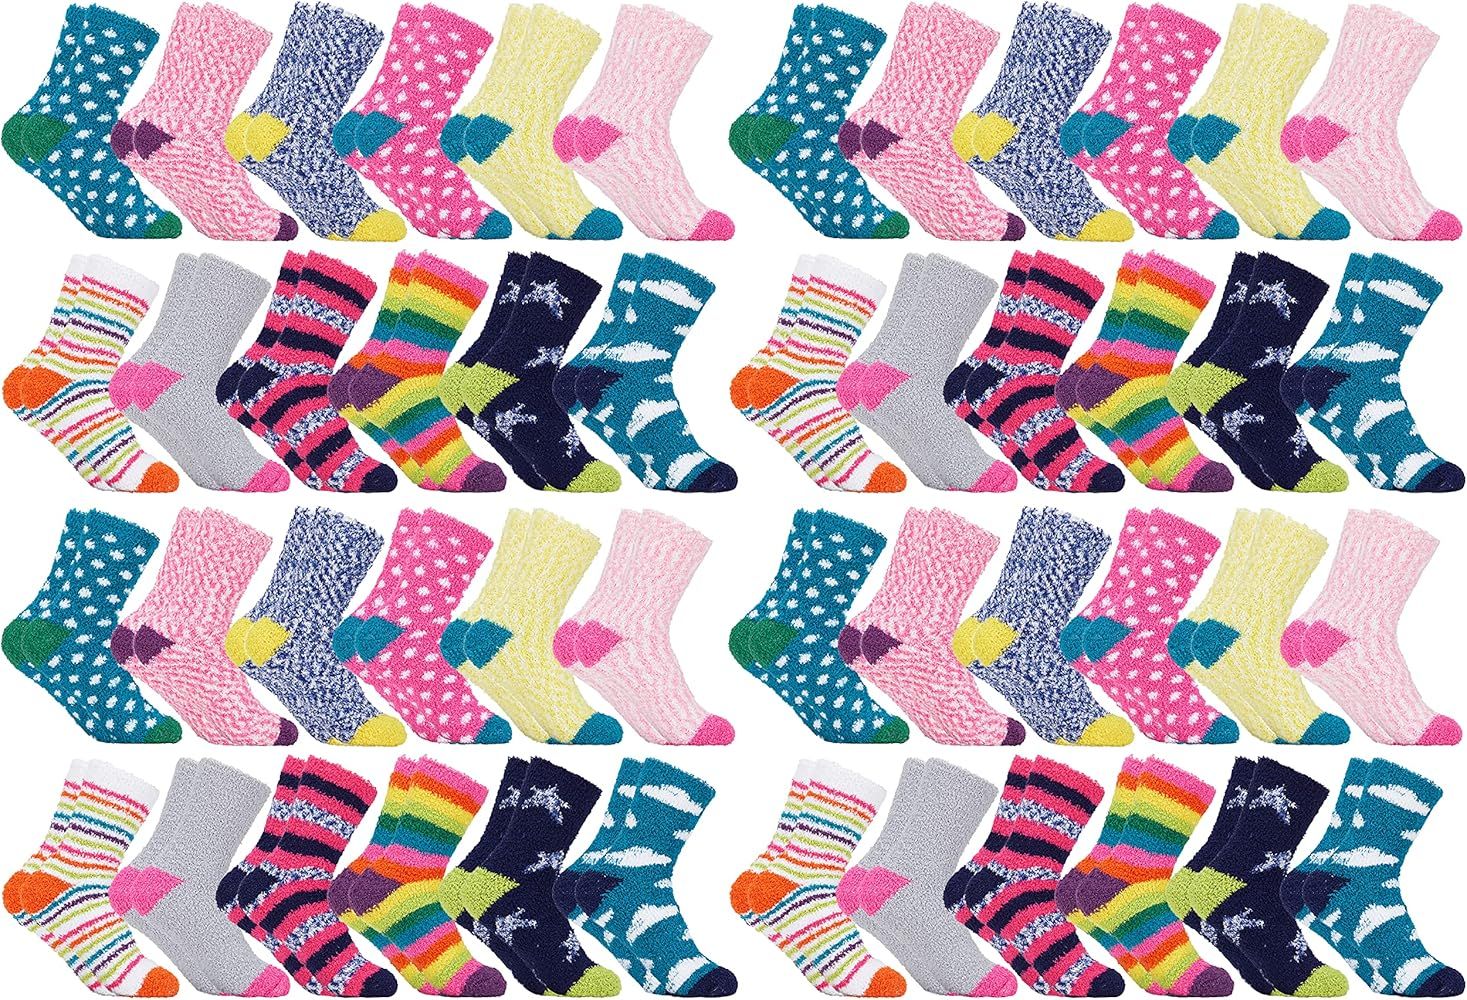 48 Pairs of Womens Fuzzy Socks in Bulk, Furry Soft Warm Cozy Sock Packs, Wholesale, Colorful Winter  | Amazon (US)